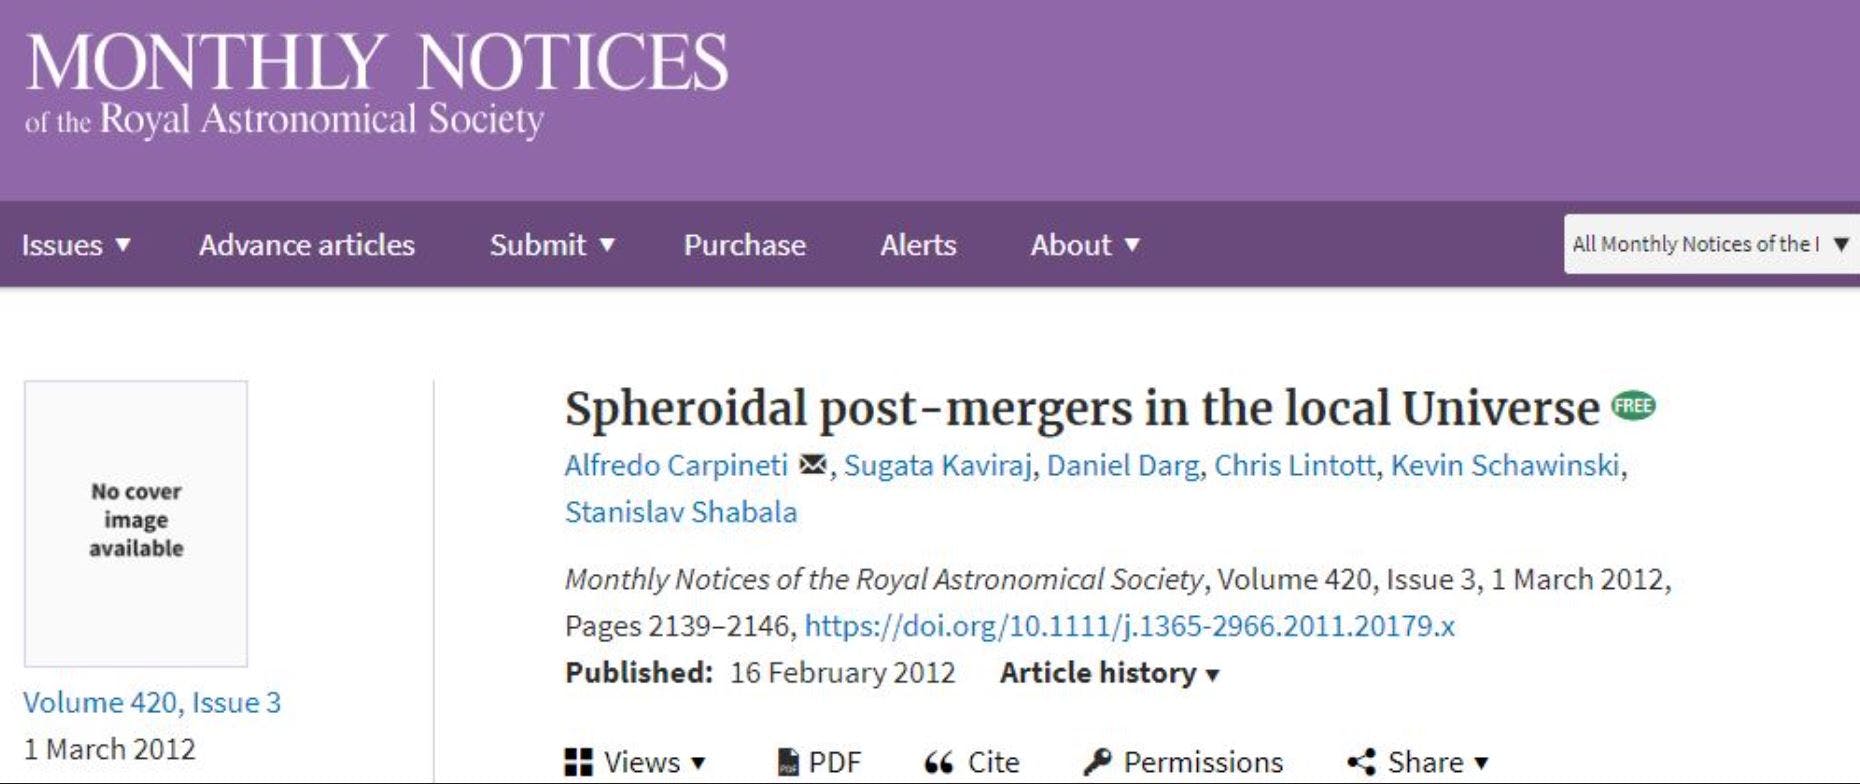 Spheroidal post-mergers in the local Universe